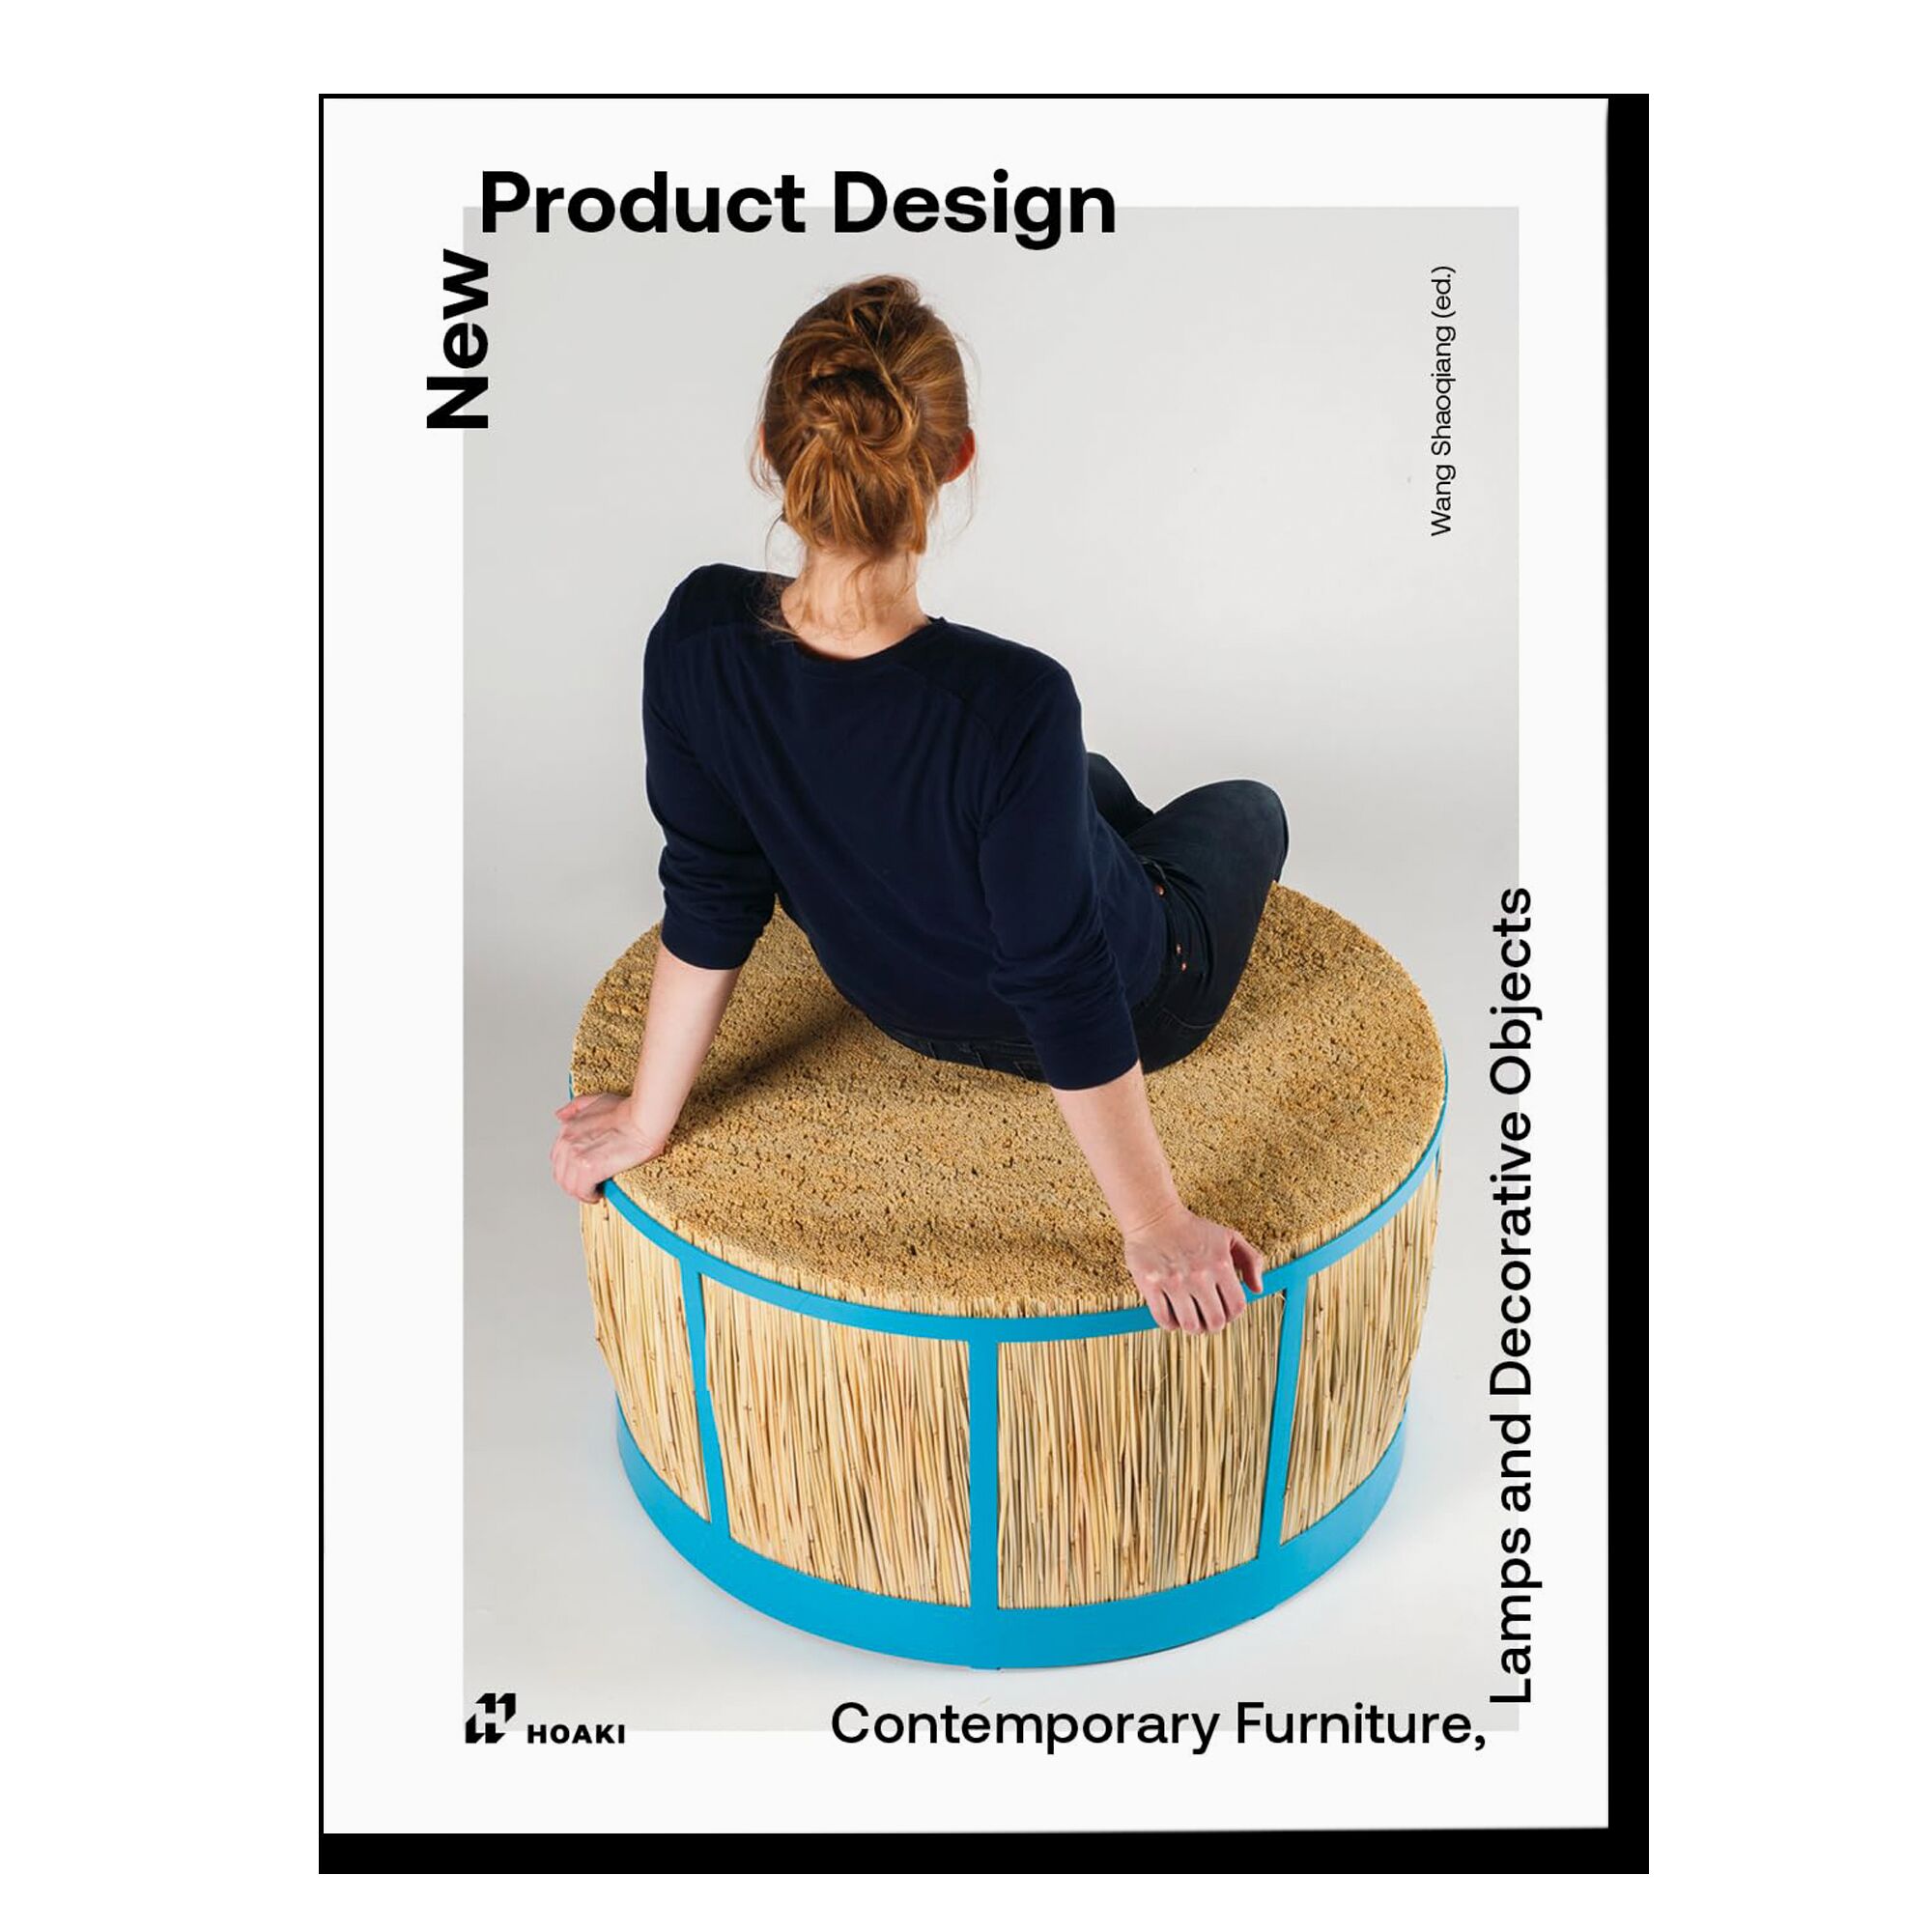 New Product Design: Contemporary Furniture, Lamps and Decorative Objects